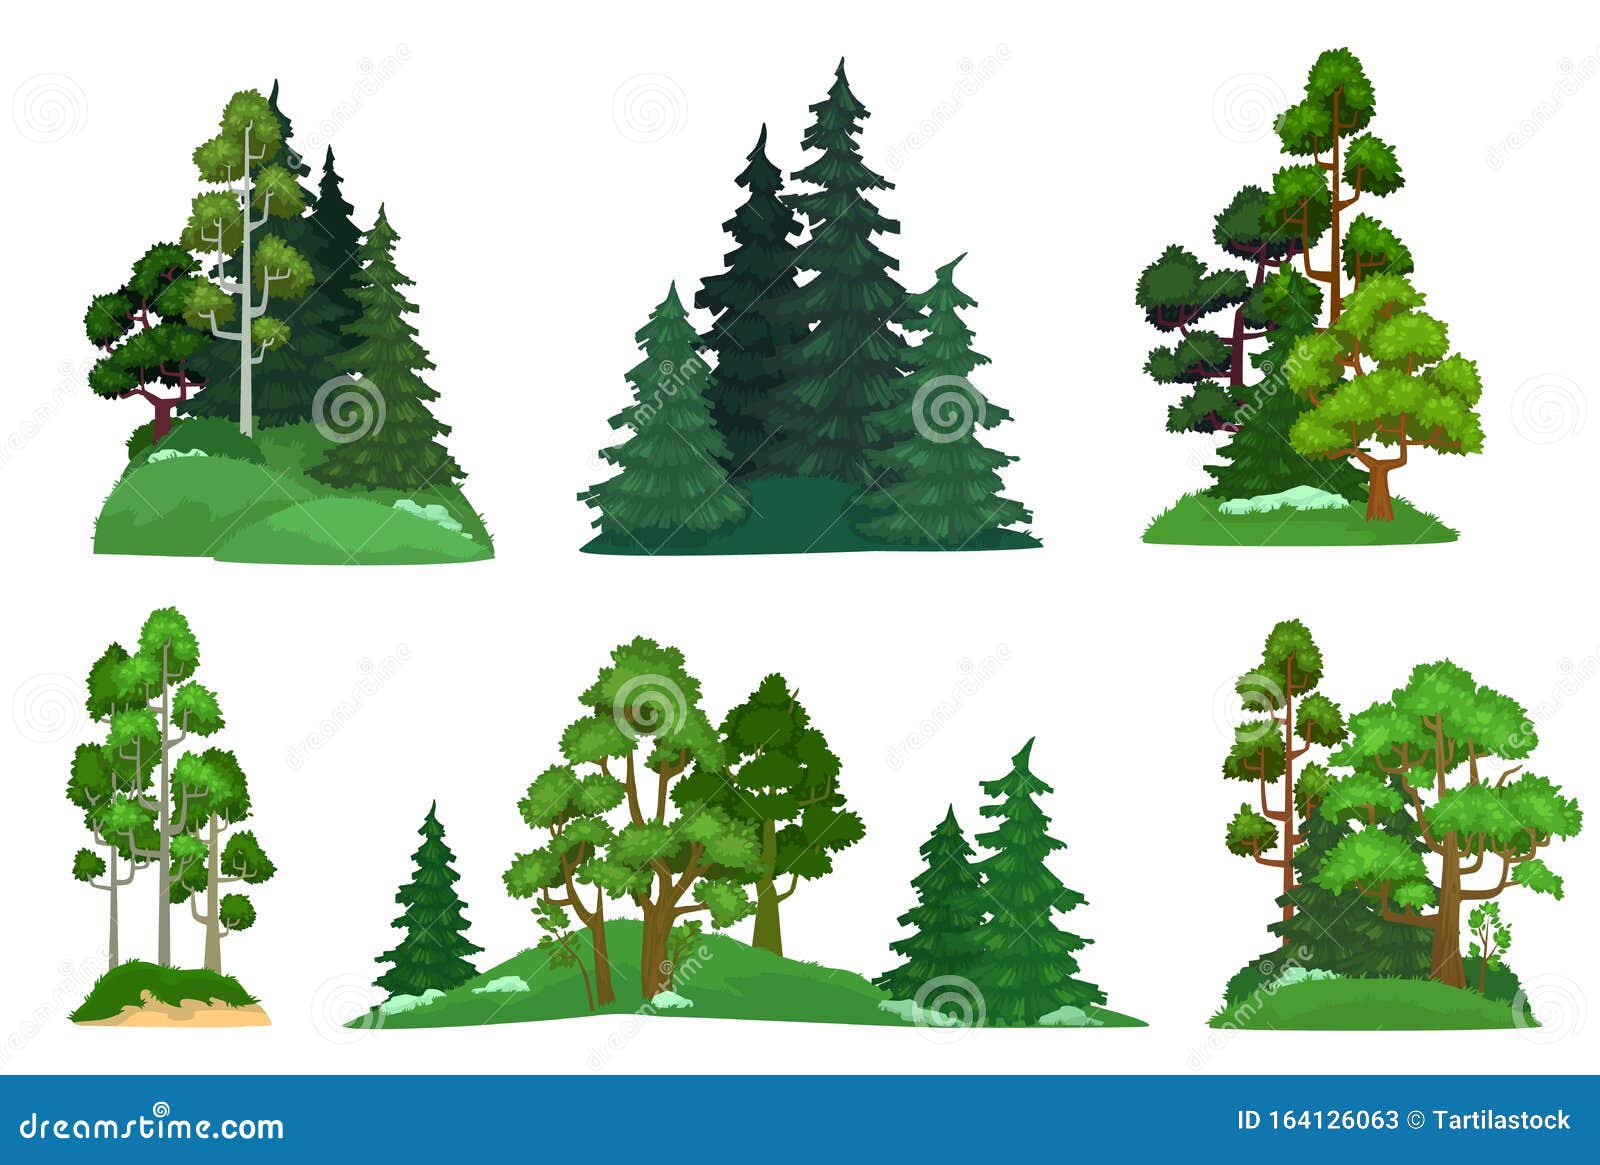 forest trees. green fir tree, forests pine composition and  trees cartoon   set